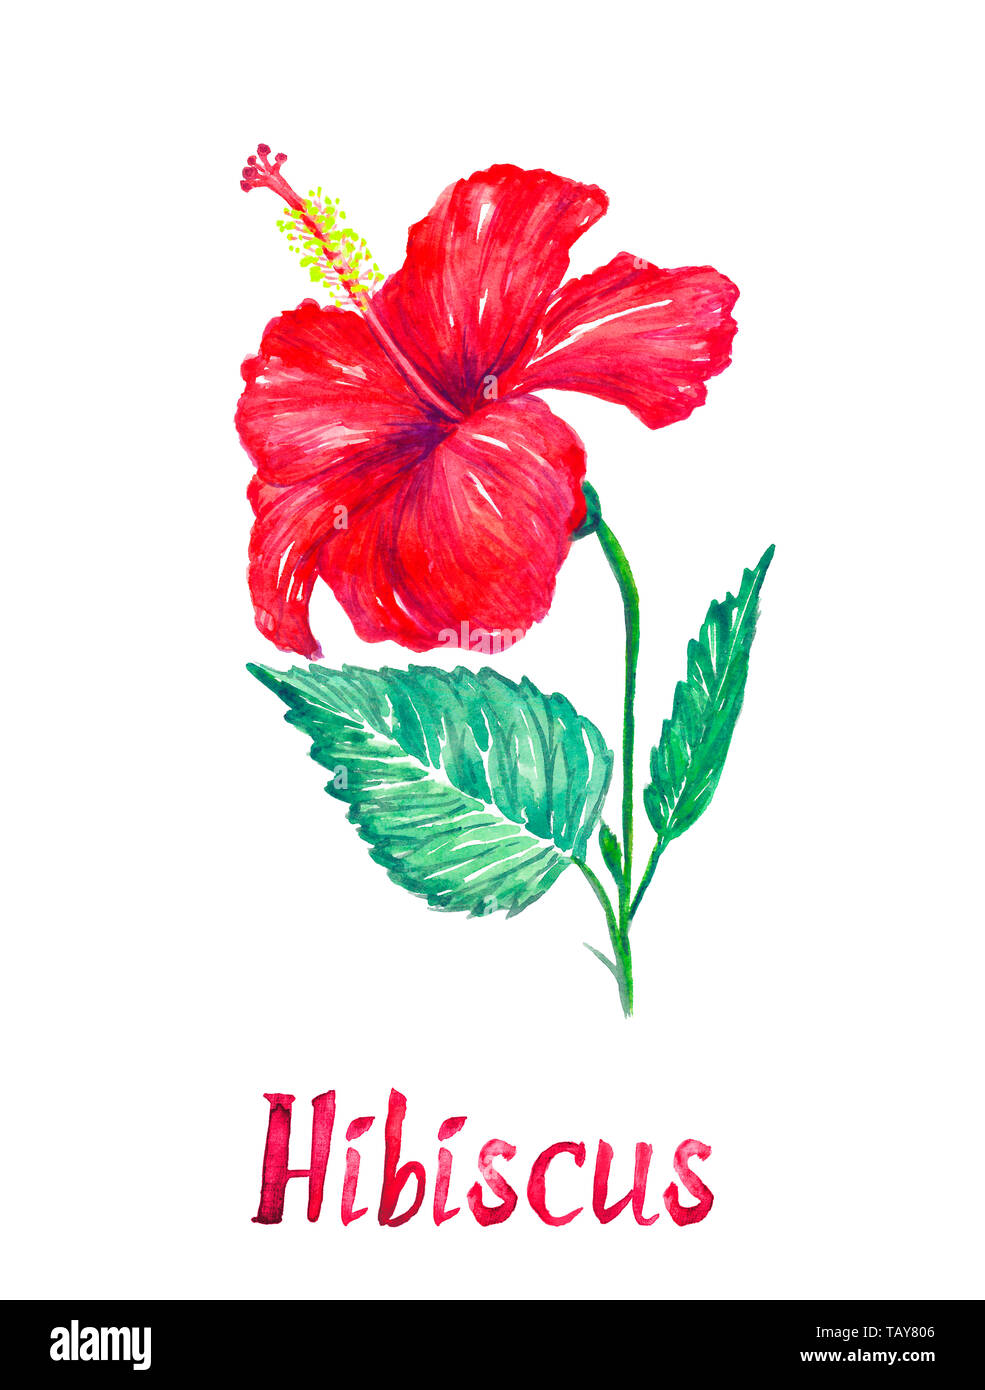 Hibiscus flowers side view and leaves, side view, isolated on white hand painted watercolor illustration with handwritten inscription Stock Photo